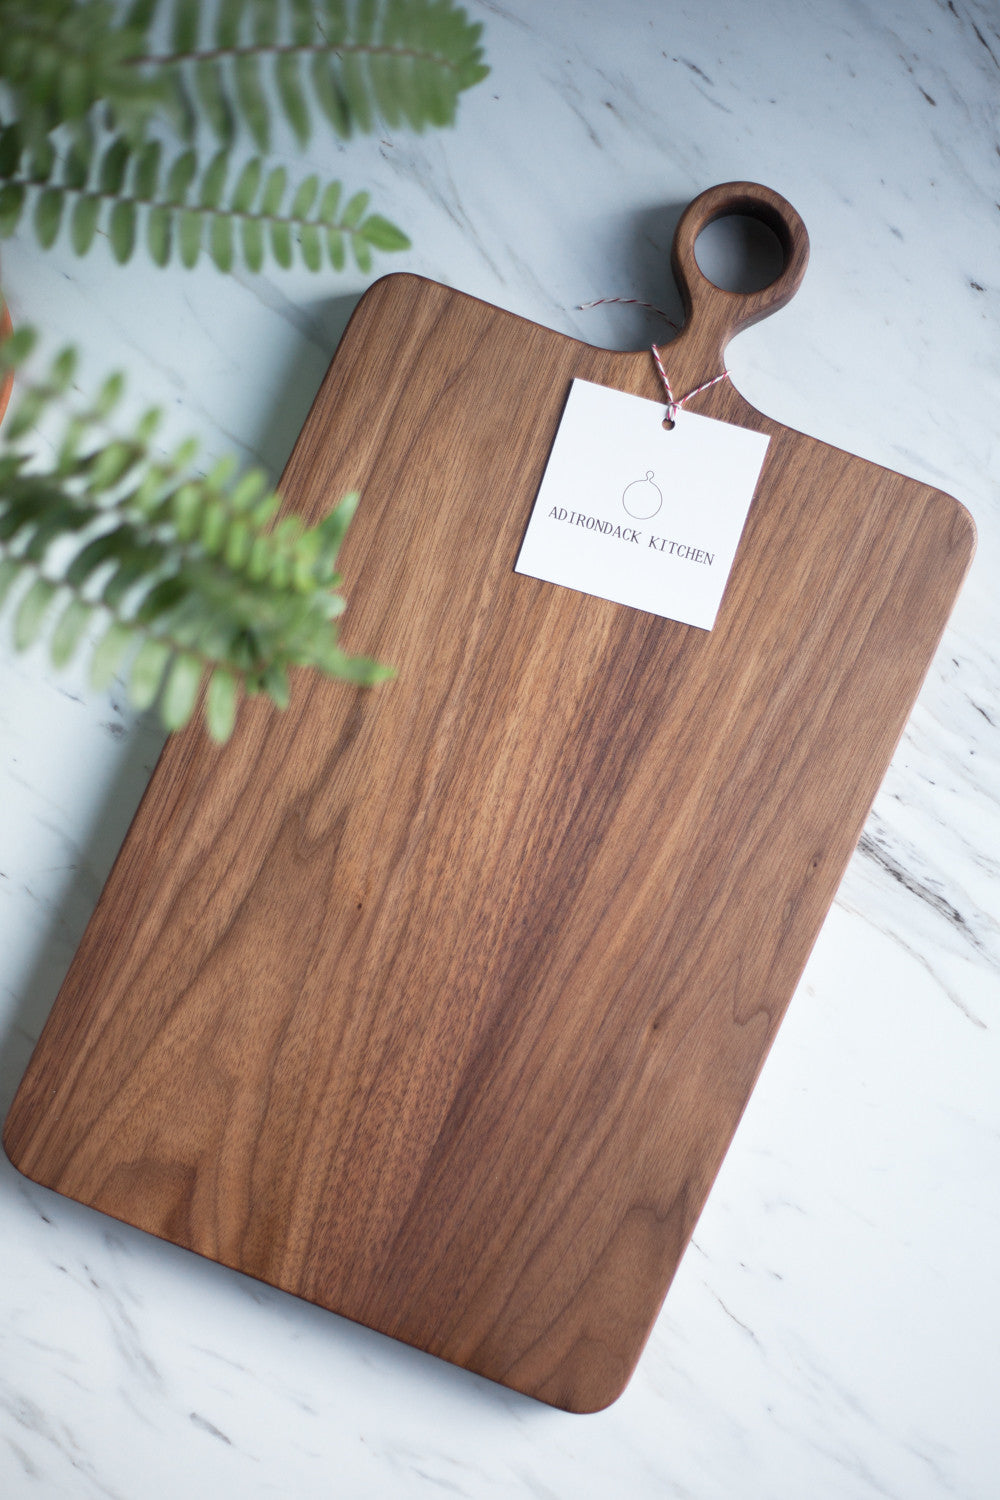 Handmade Small Size Wooden Cutting Board With Handle For Kitchen 12 x 8 inch